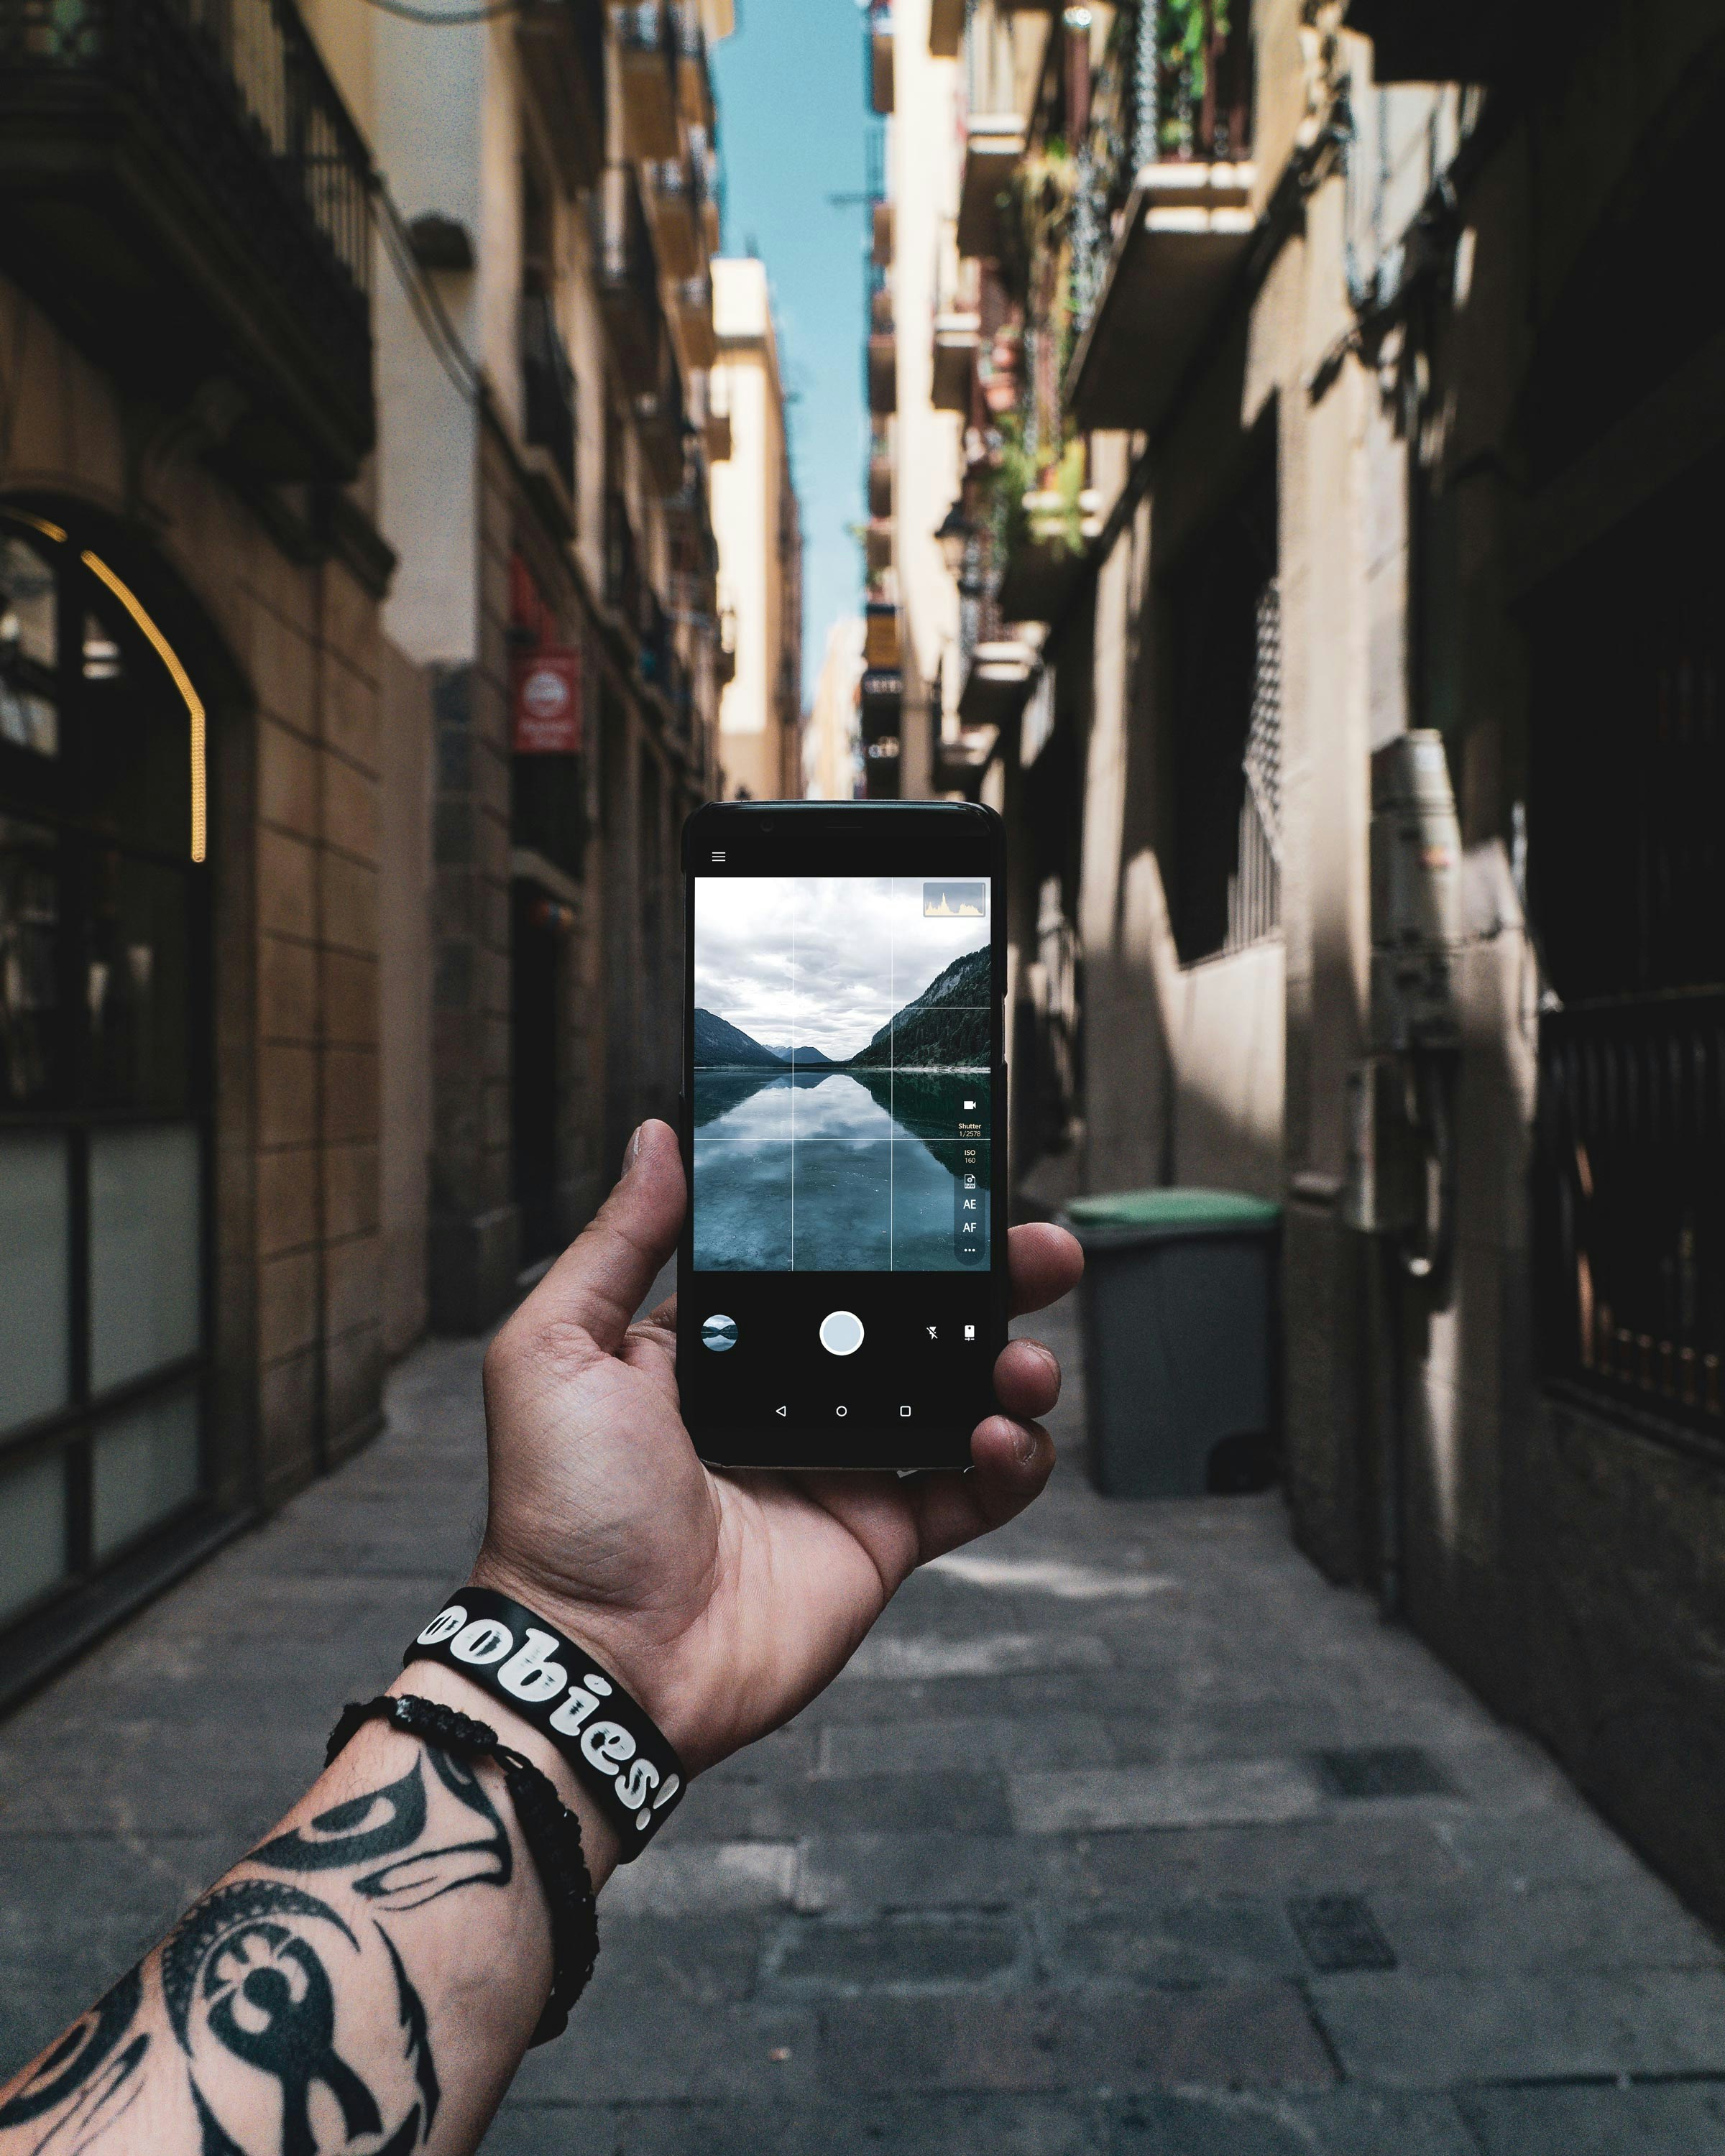 Take your phone style to the next level with gorgeous phone wallpapers from Unsplash. Our community of professional photographers have contributed thousands of beautiful images, and all of them can be downloaded for free.